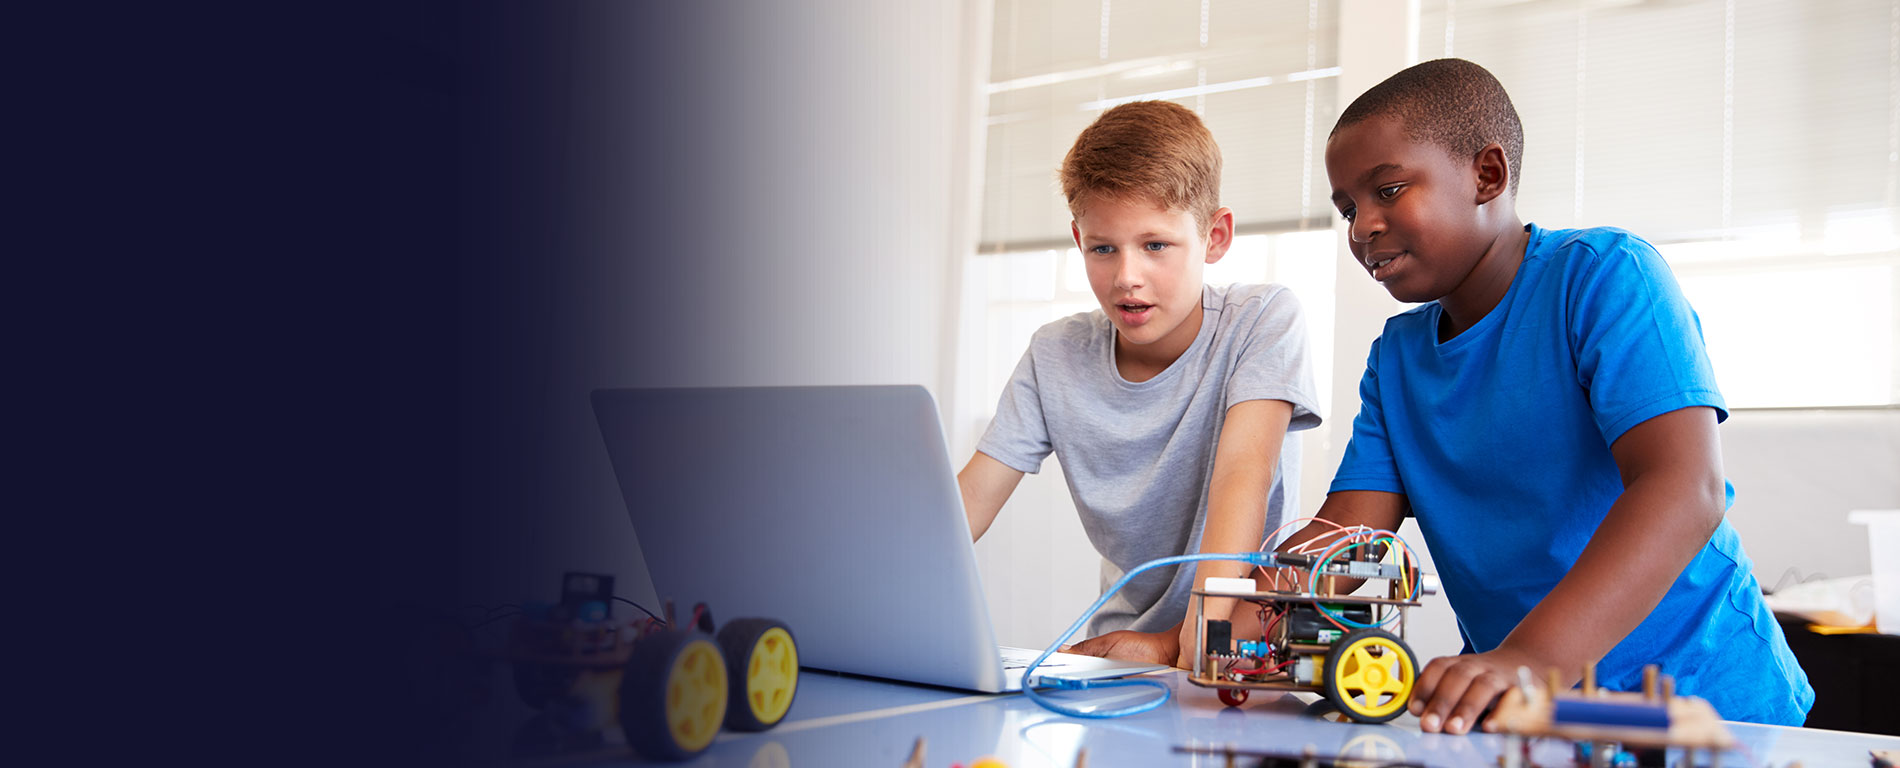 Two elementary-school-age boys working on a robotics project together